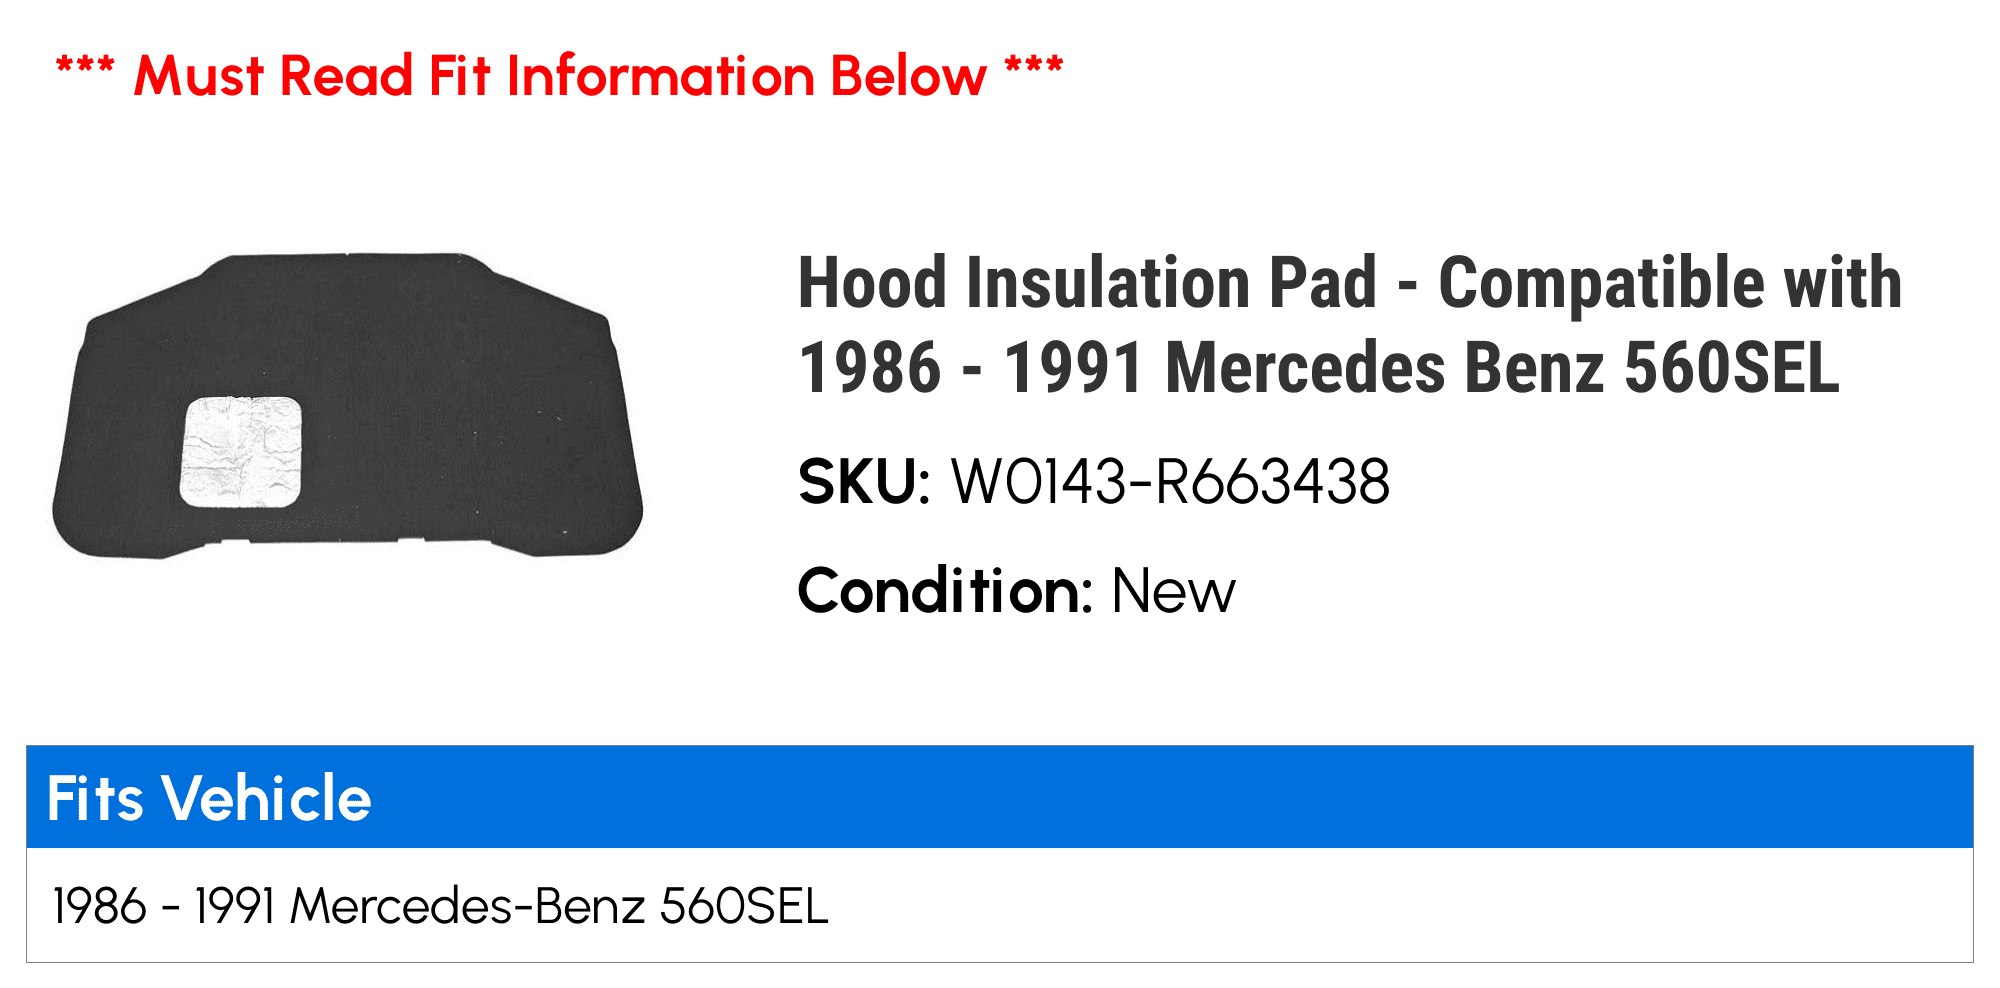 Hood Insulation Pad Compatible with 1986-1991 Mercedes Benz 560SEL 